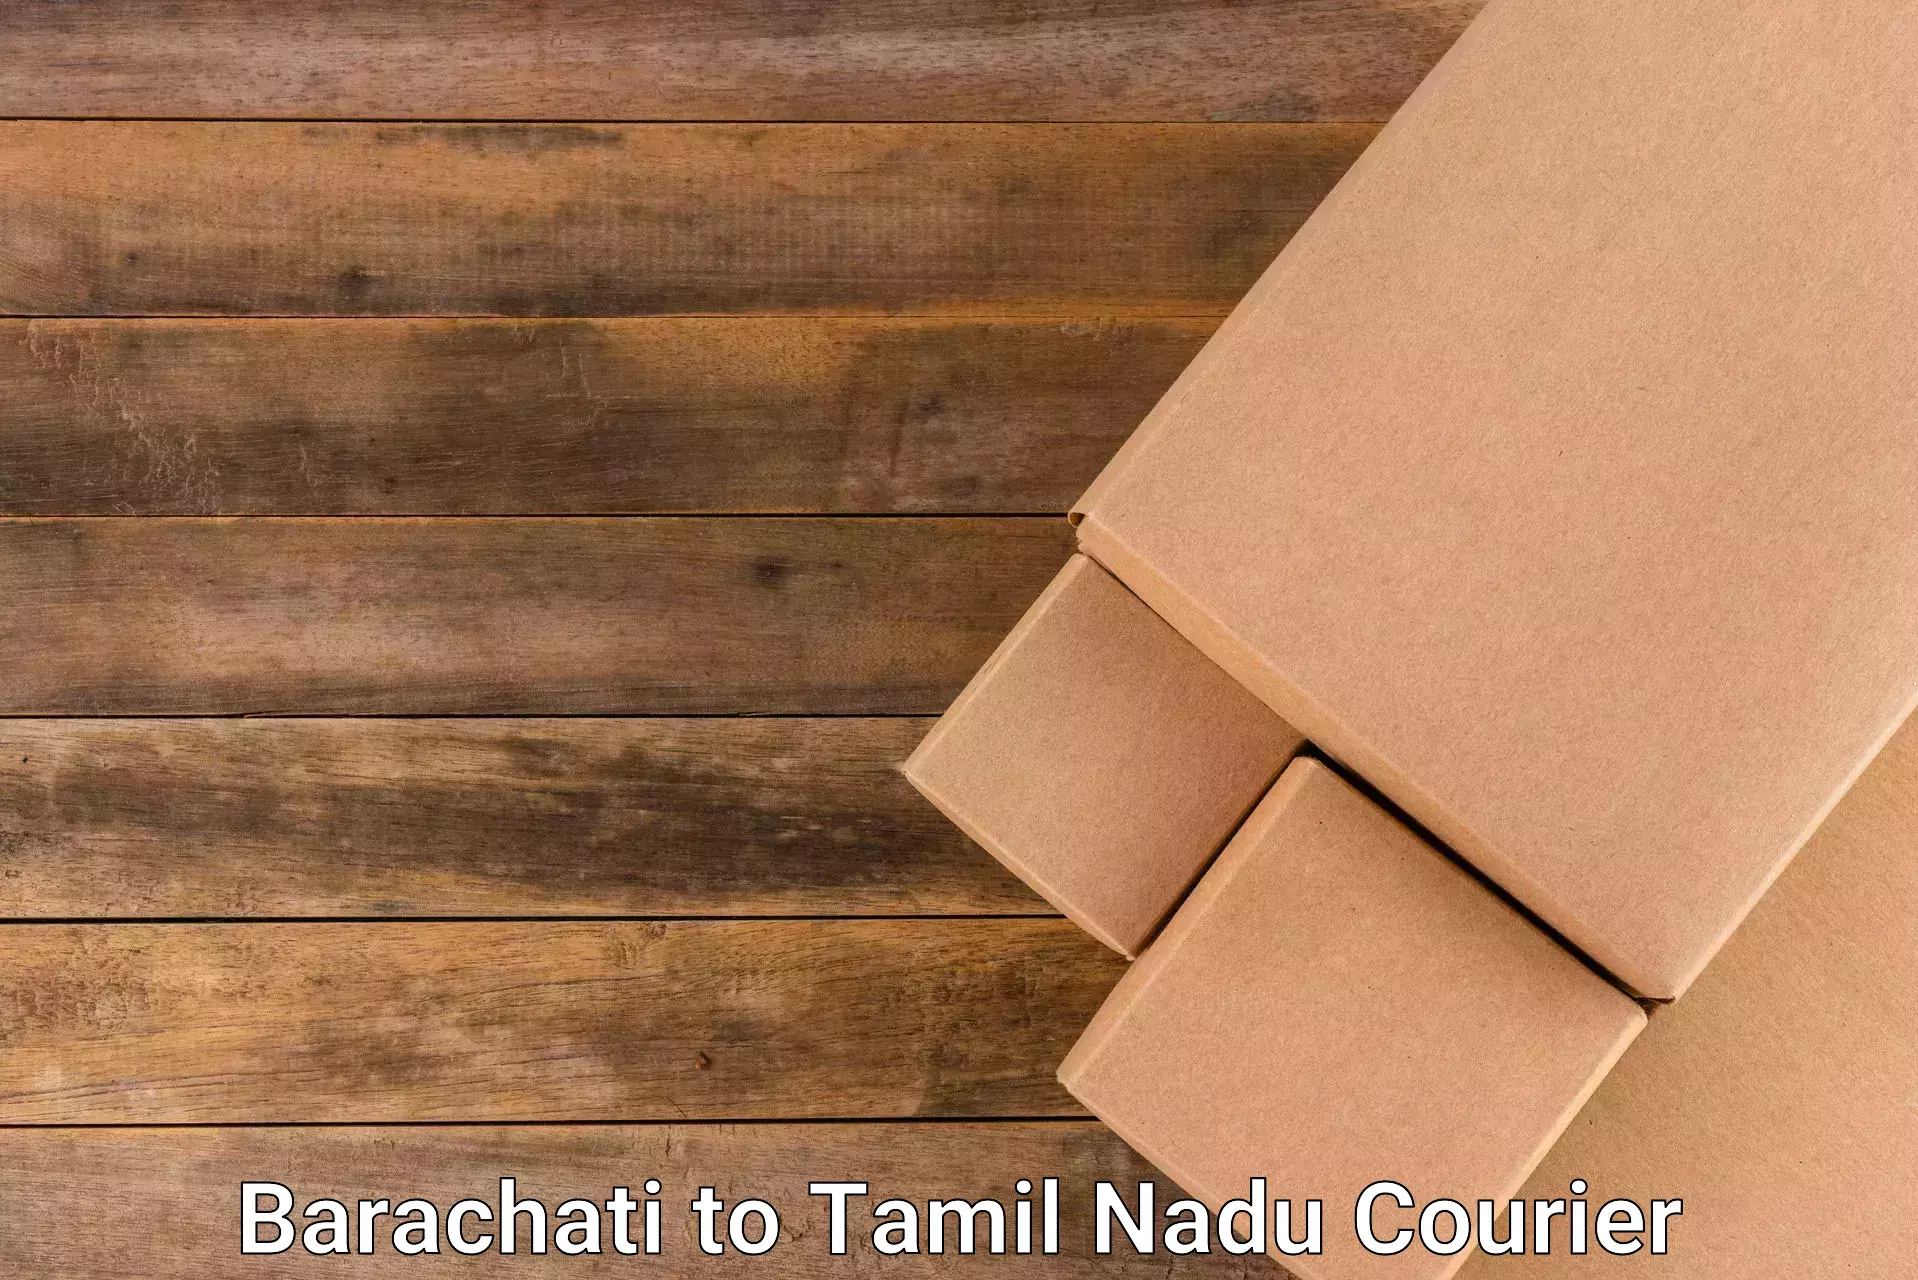 Tailored delivery services Barachati to Sirkali